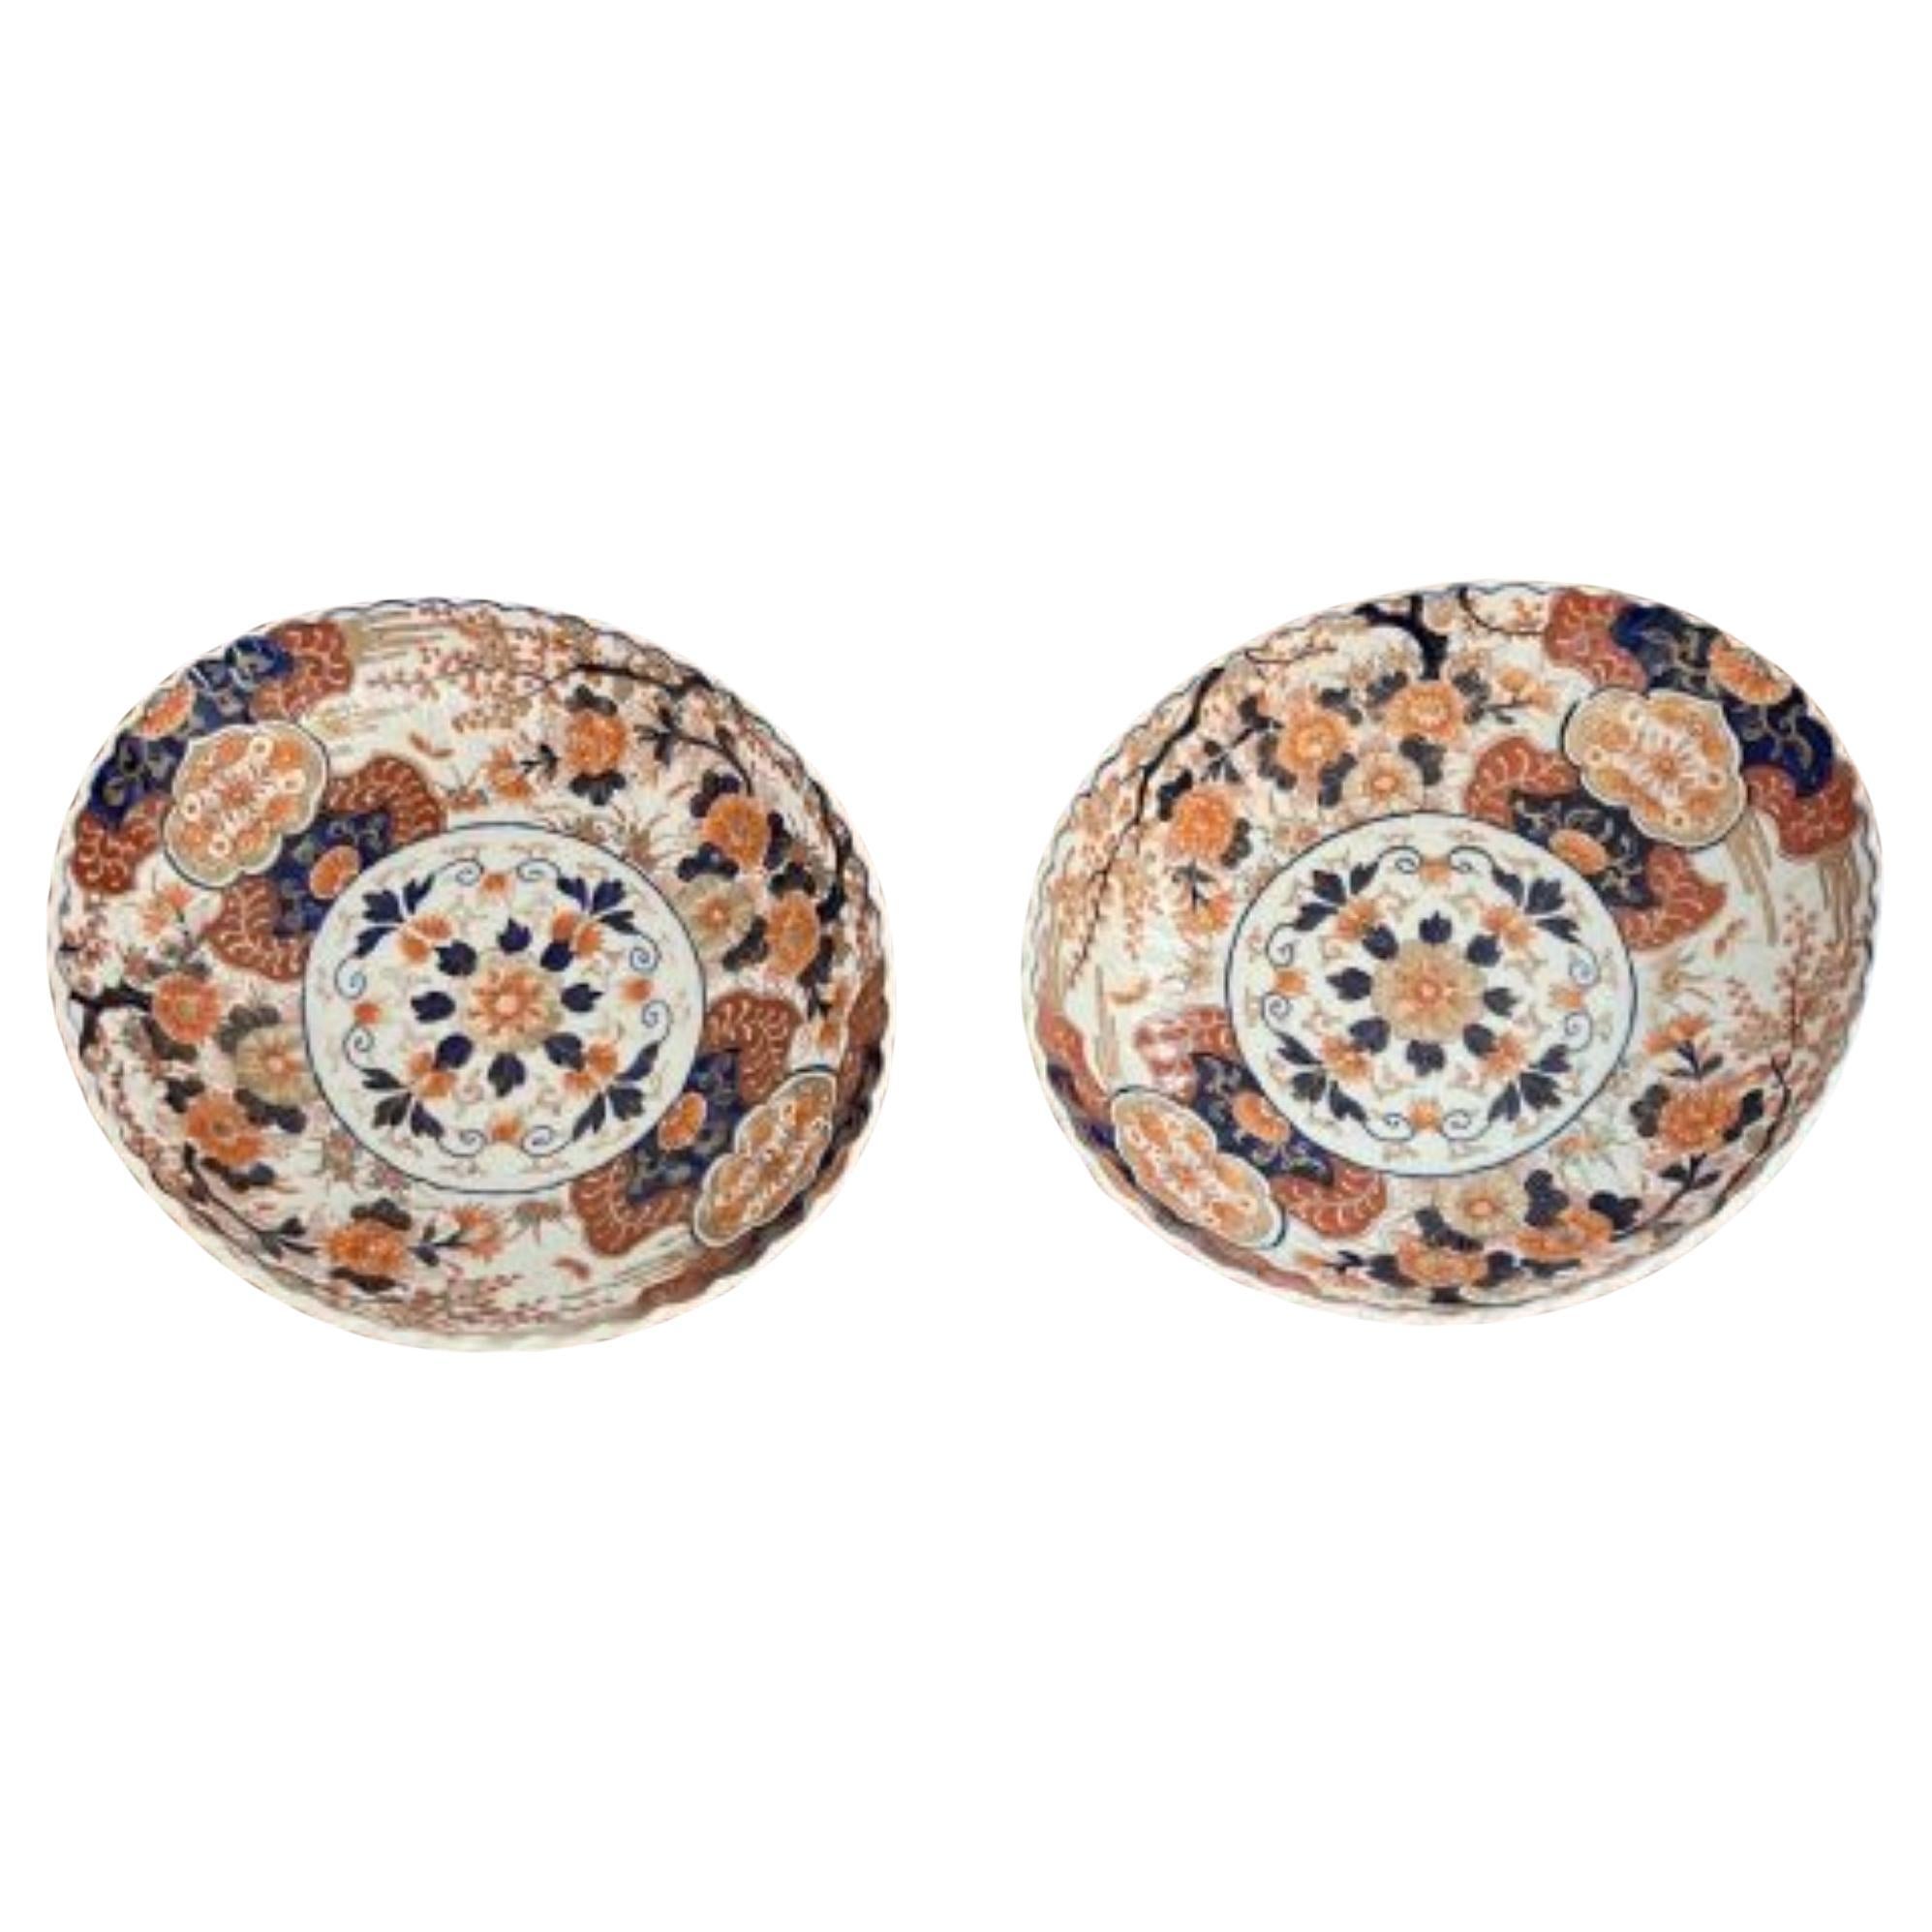 Outstanding quality pair of antique Japanese Imari large scalloped edge bowls  For Sale